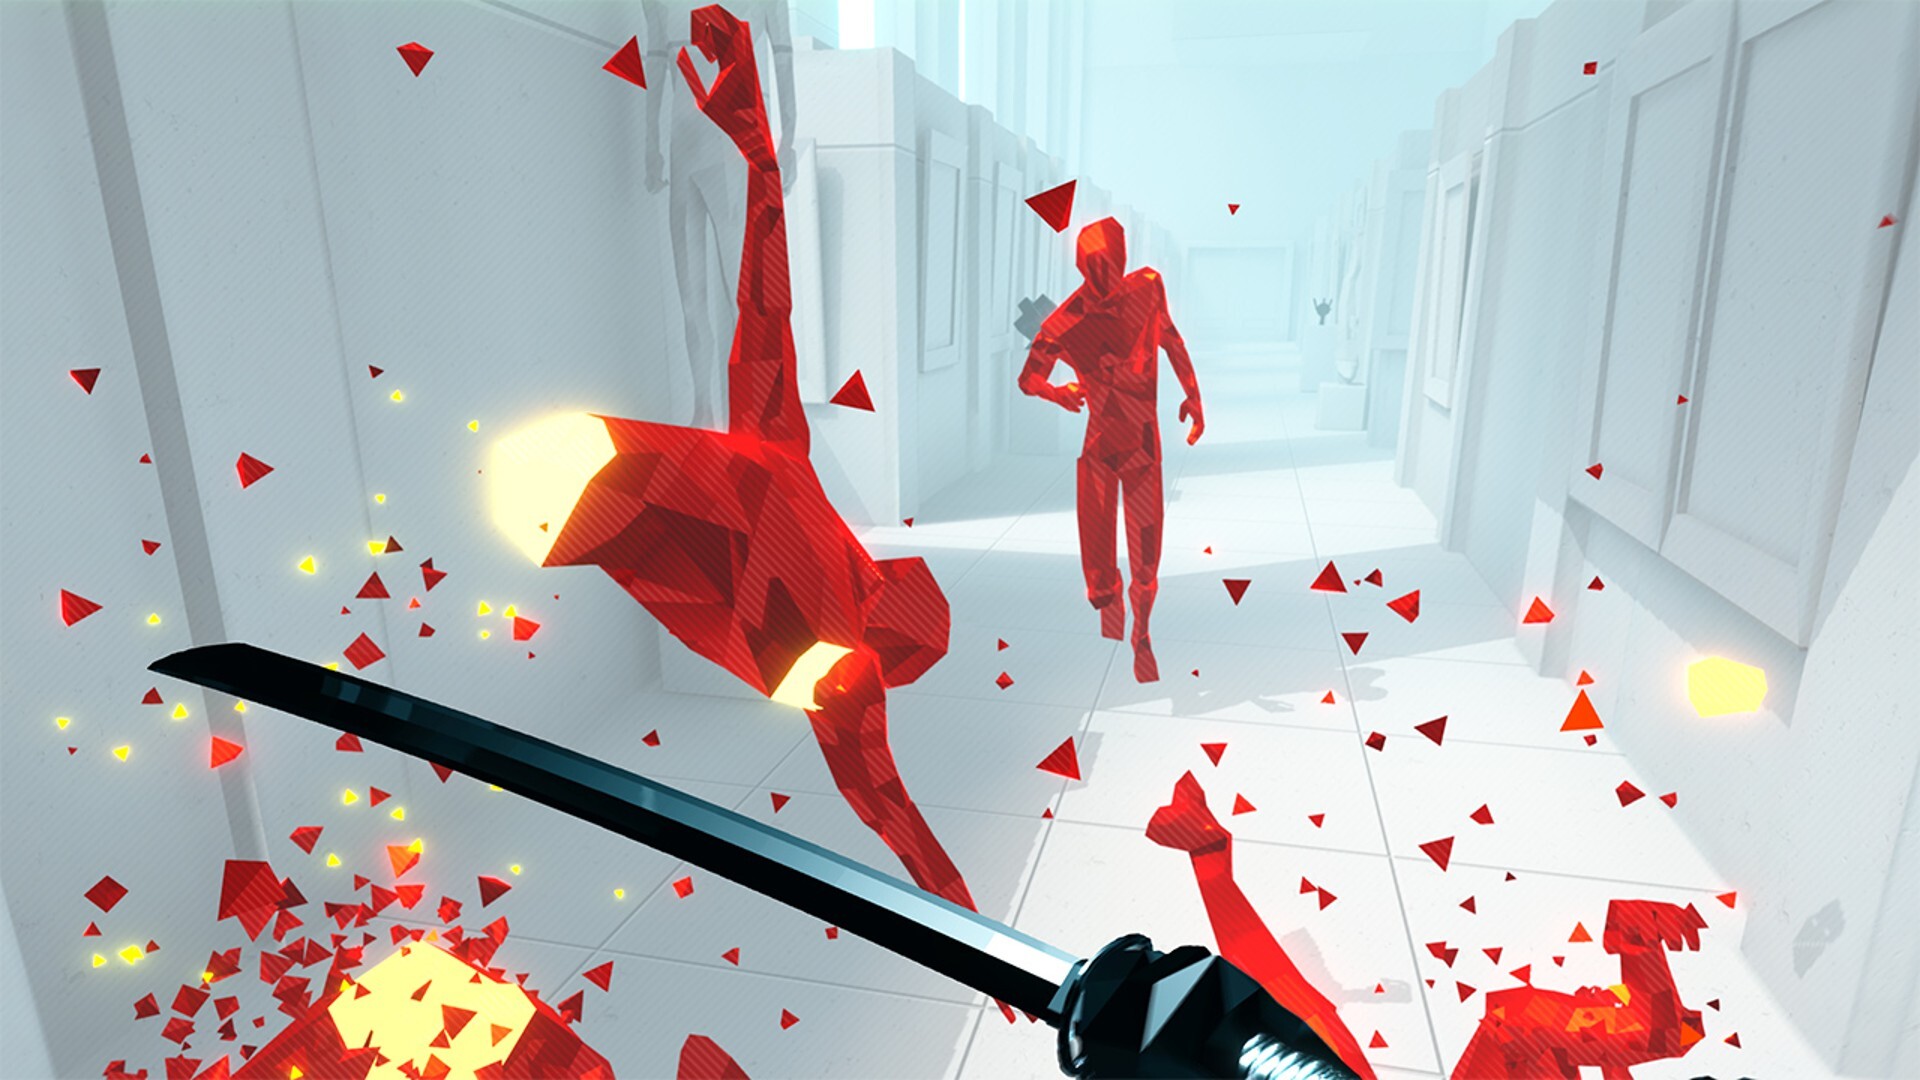 Best Switch FPS games: A player slices two red player sin Superhot